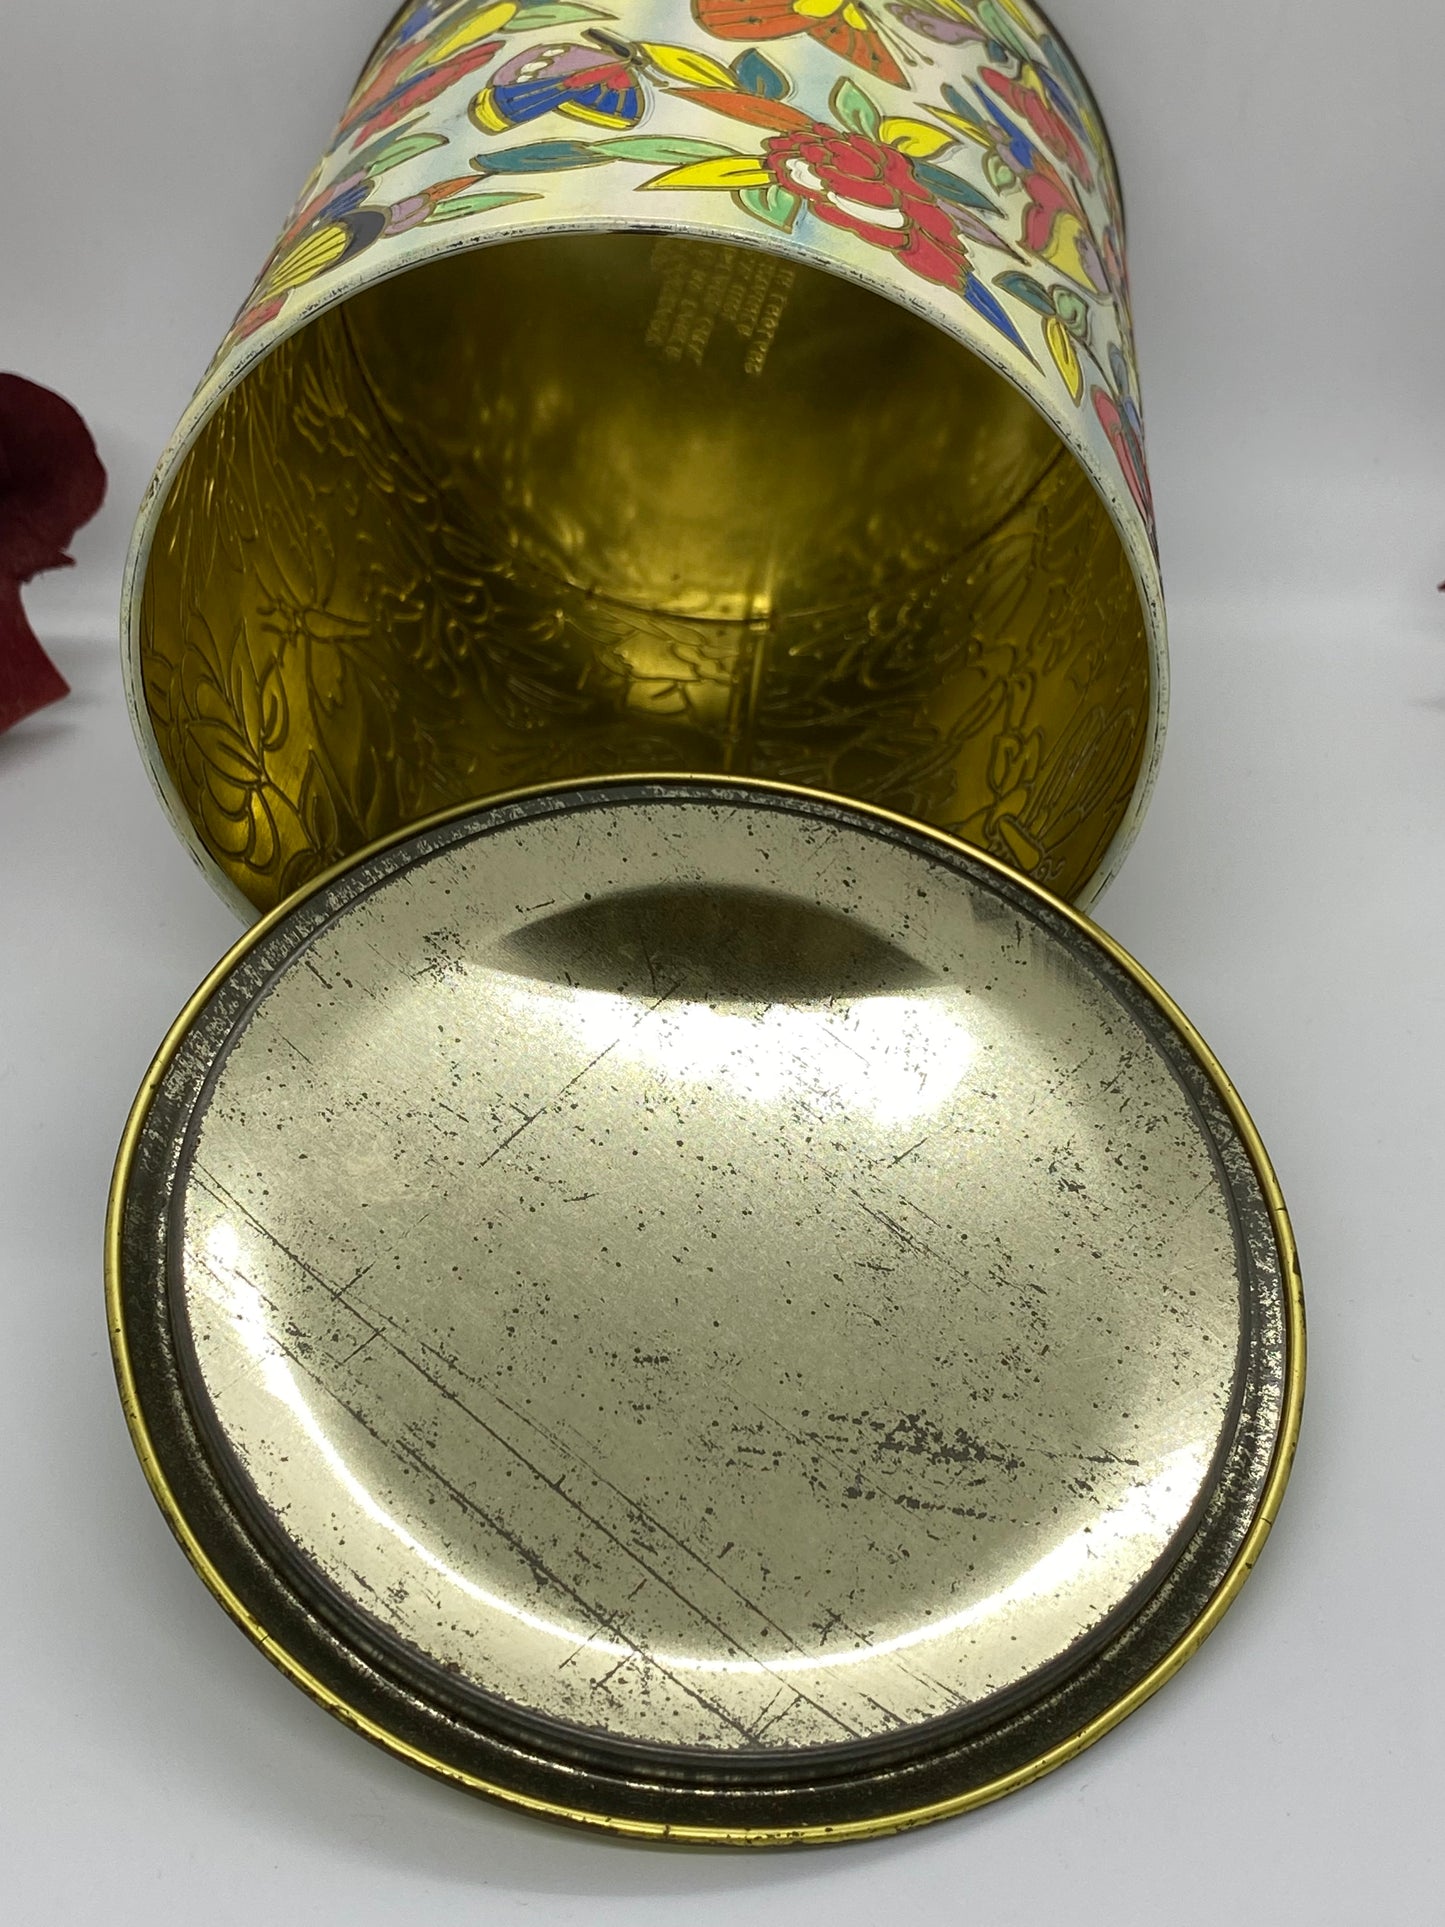 Butterfly Tin, Designed by Daher, Long Island, N. Y. Made in England